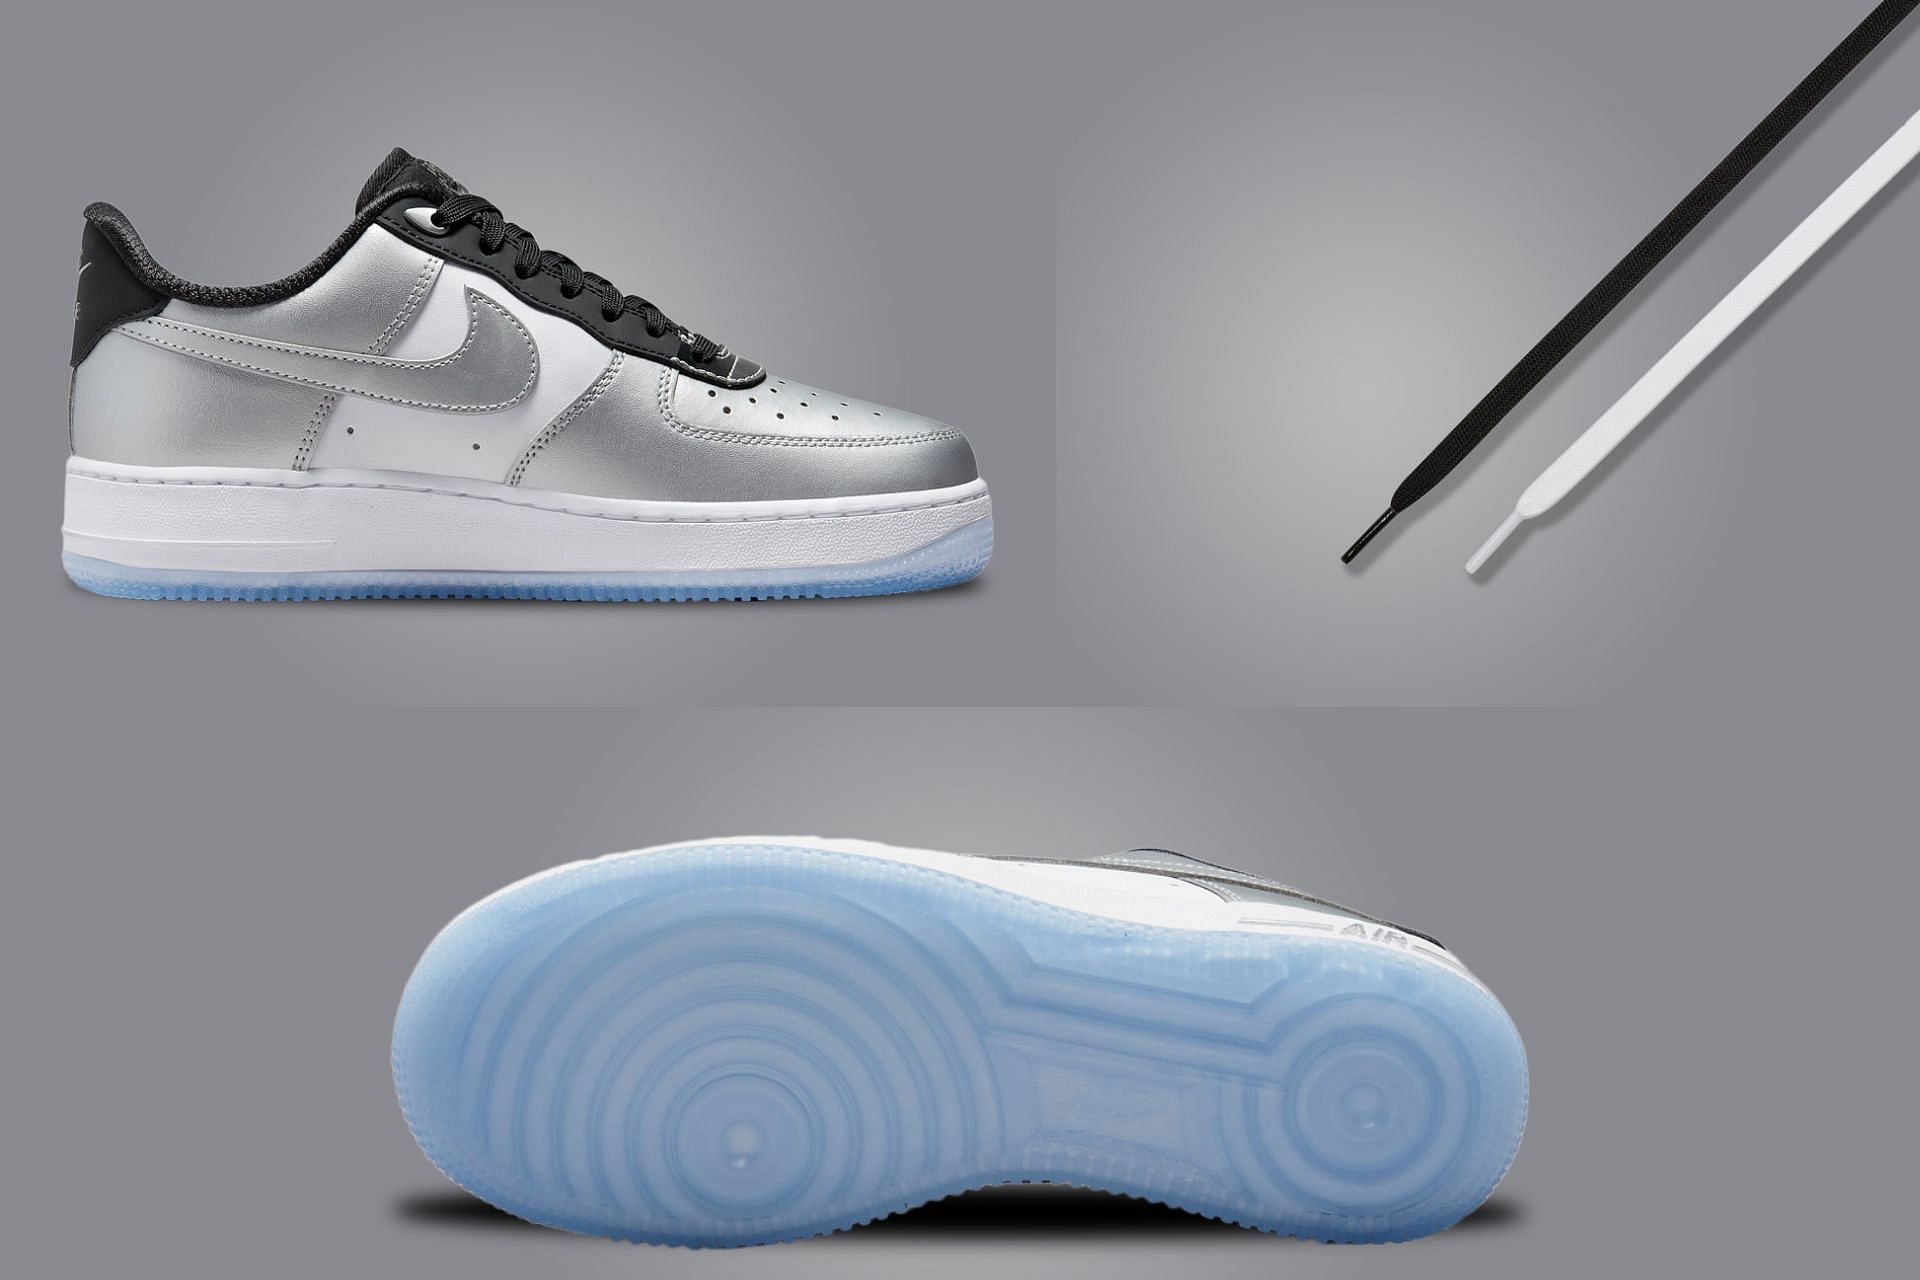 Take a look at the lace sets and outsoles of these sneakers (Image via Sportskeeda)